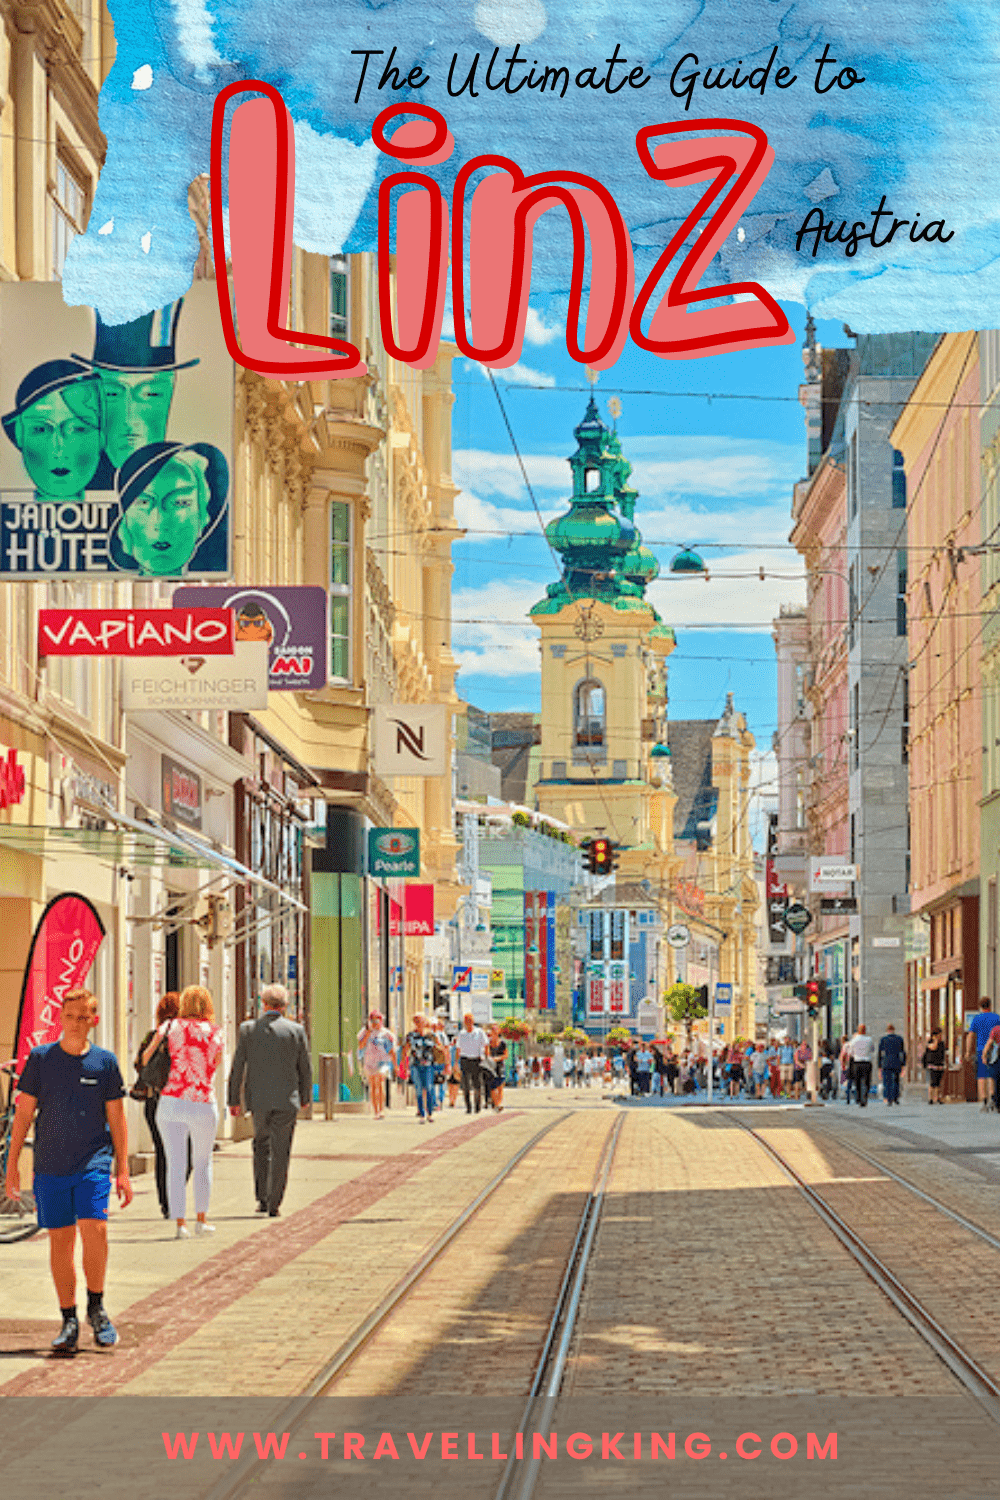 The Ultimate Guide to Linz Austria